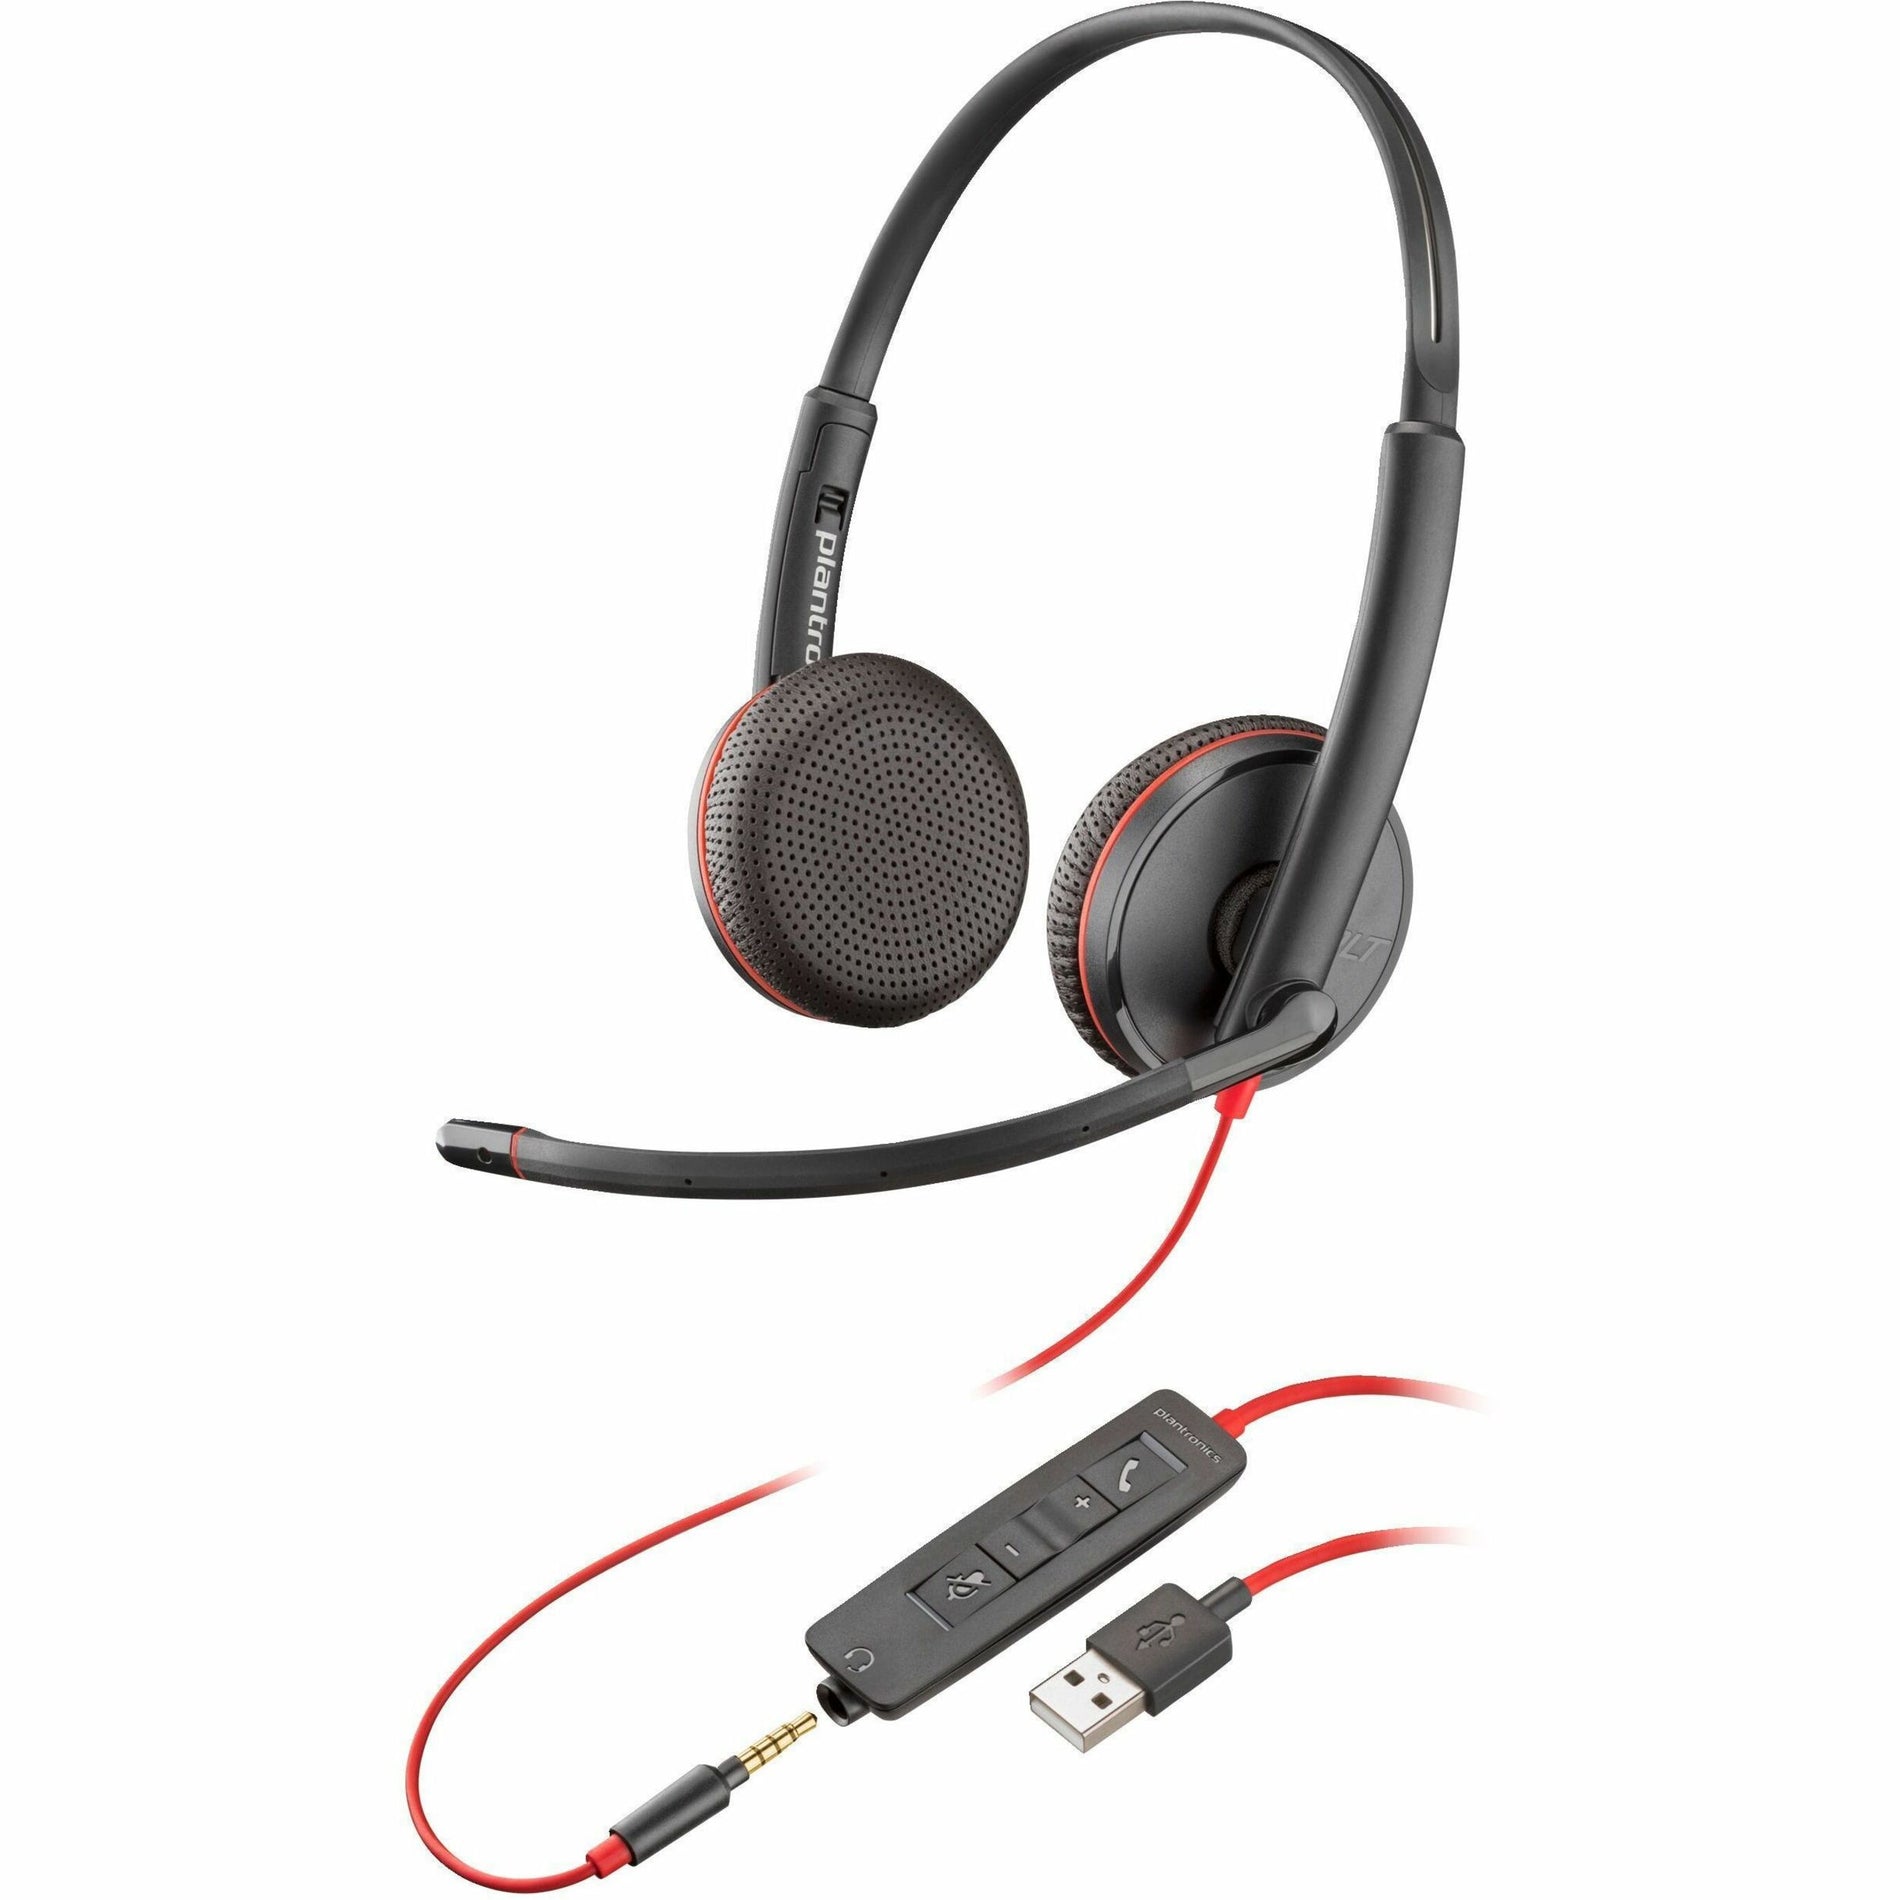 Poly Blackwire 3225 Headset, On-ear Stereo Headset with Noise Cancelling Microphone